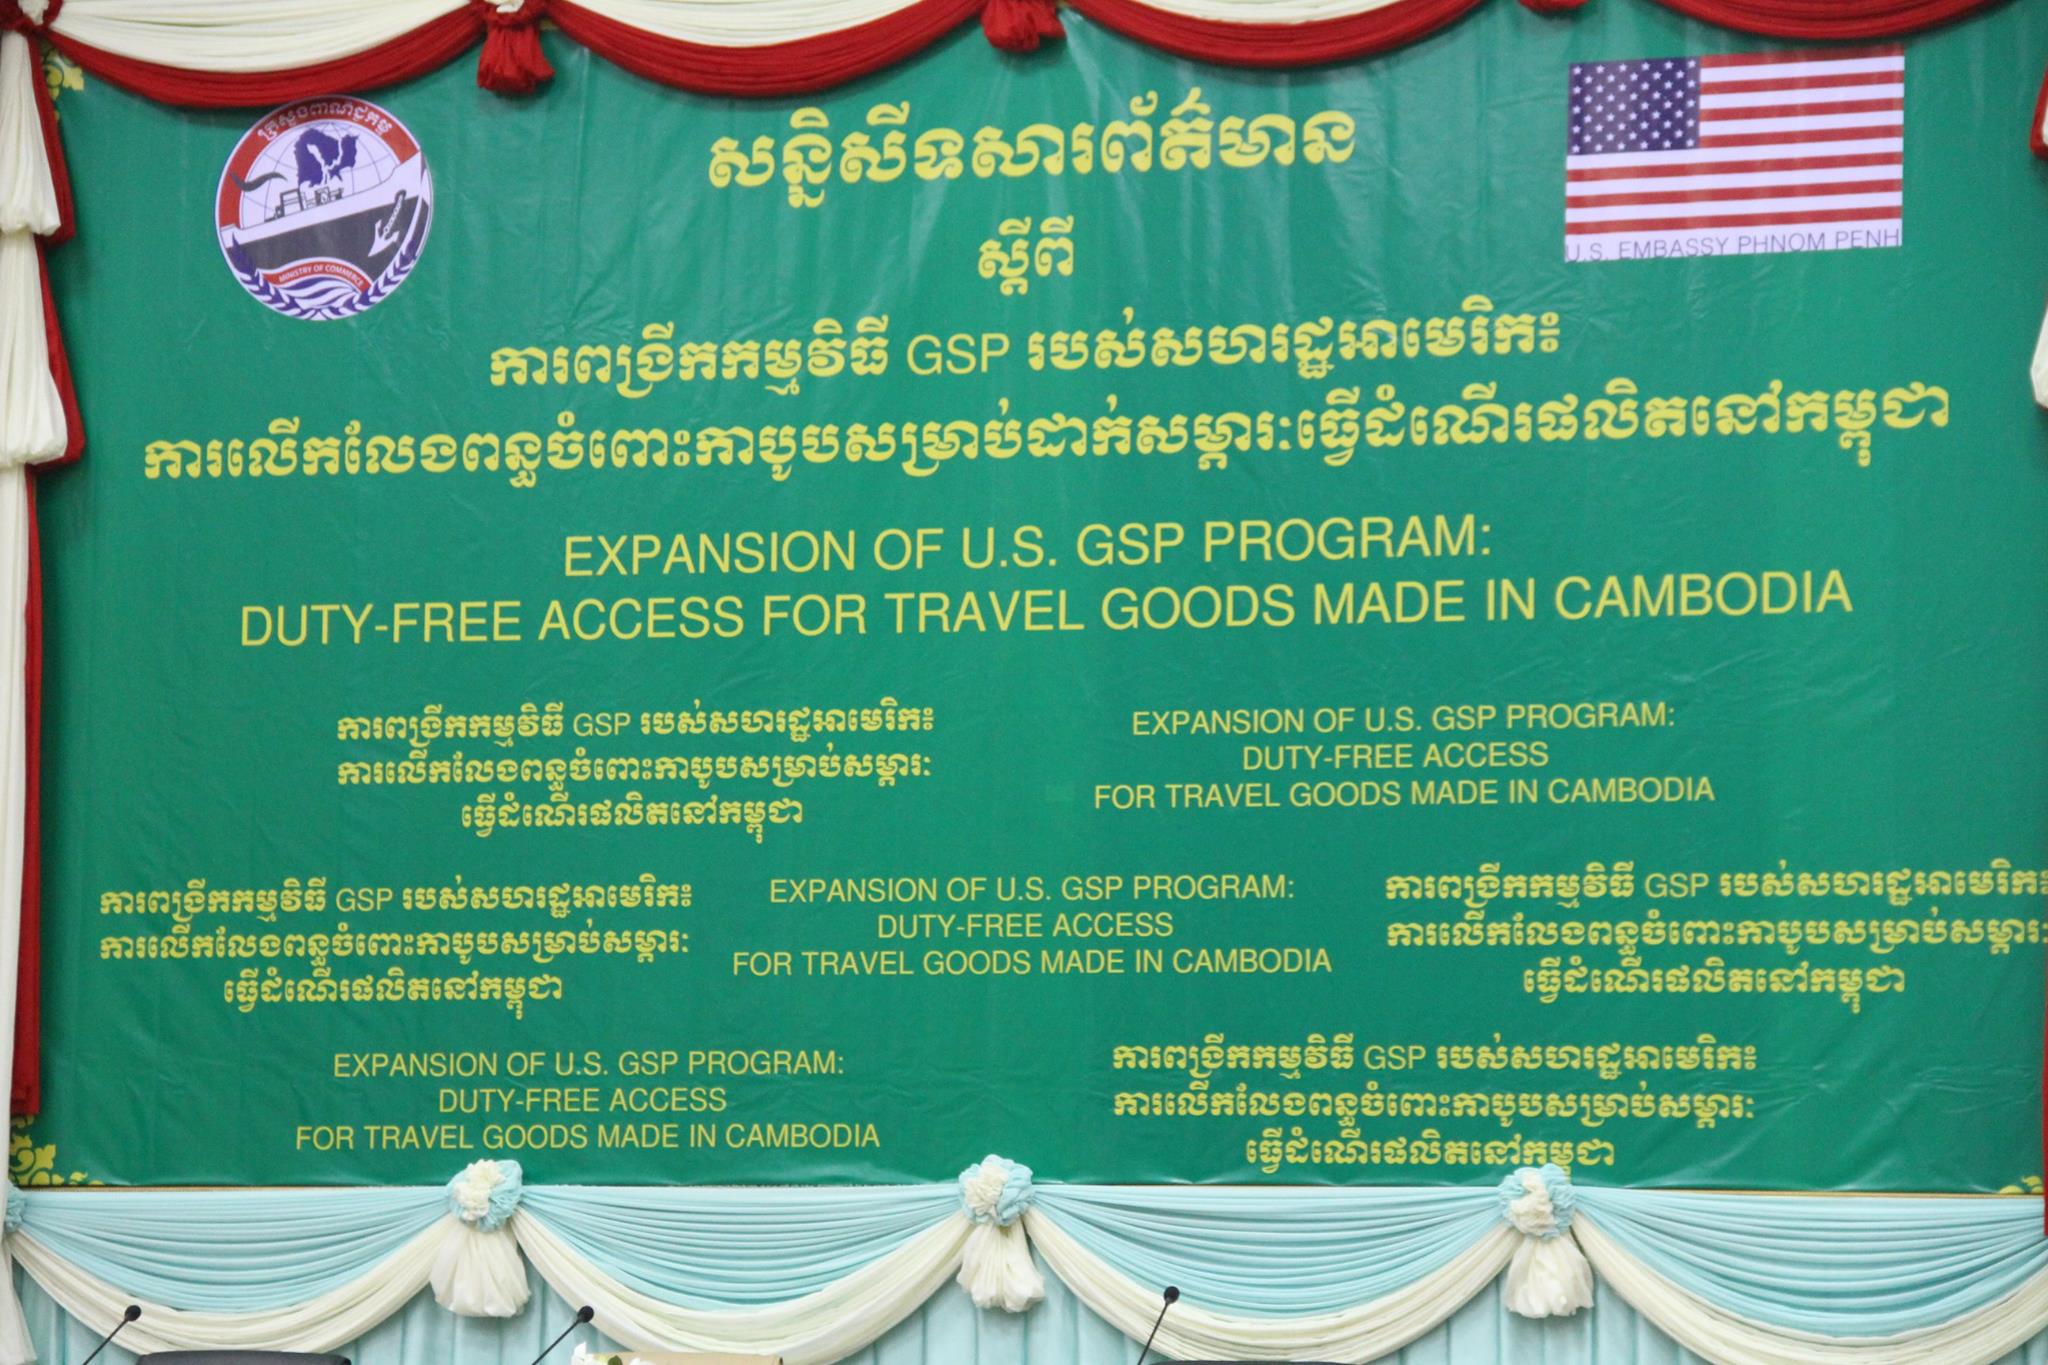 USA allows Duty-Free Export of Travel Goods produce in Cambodia